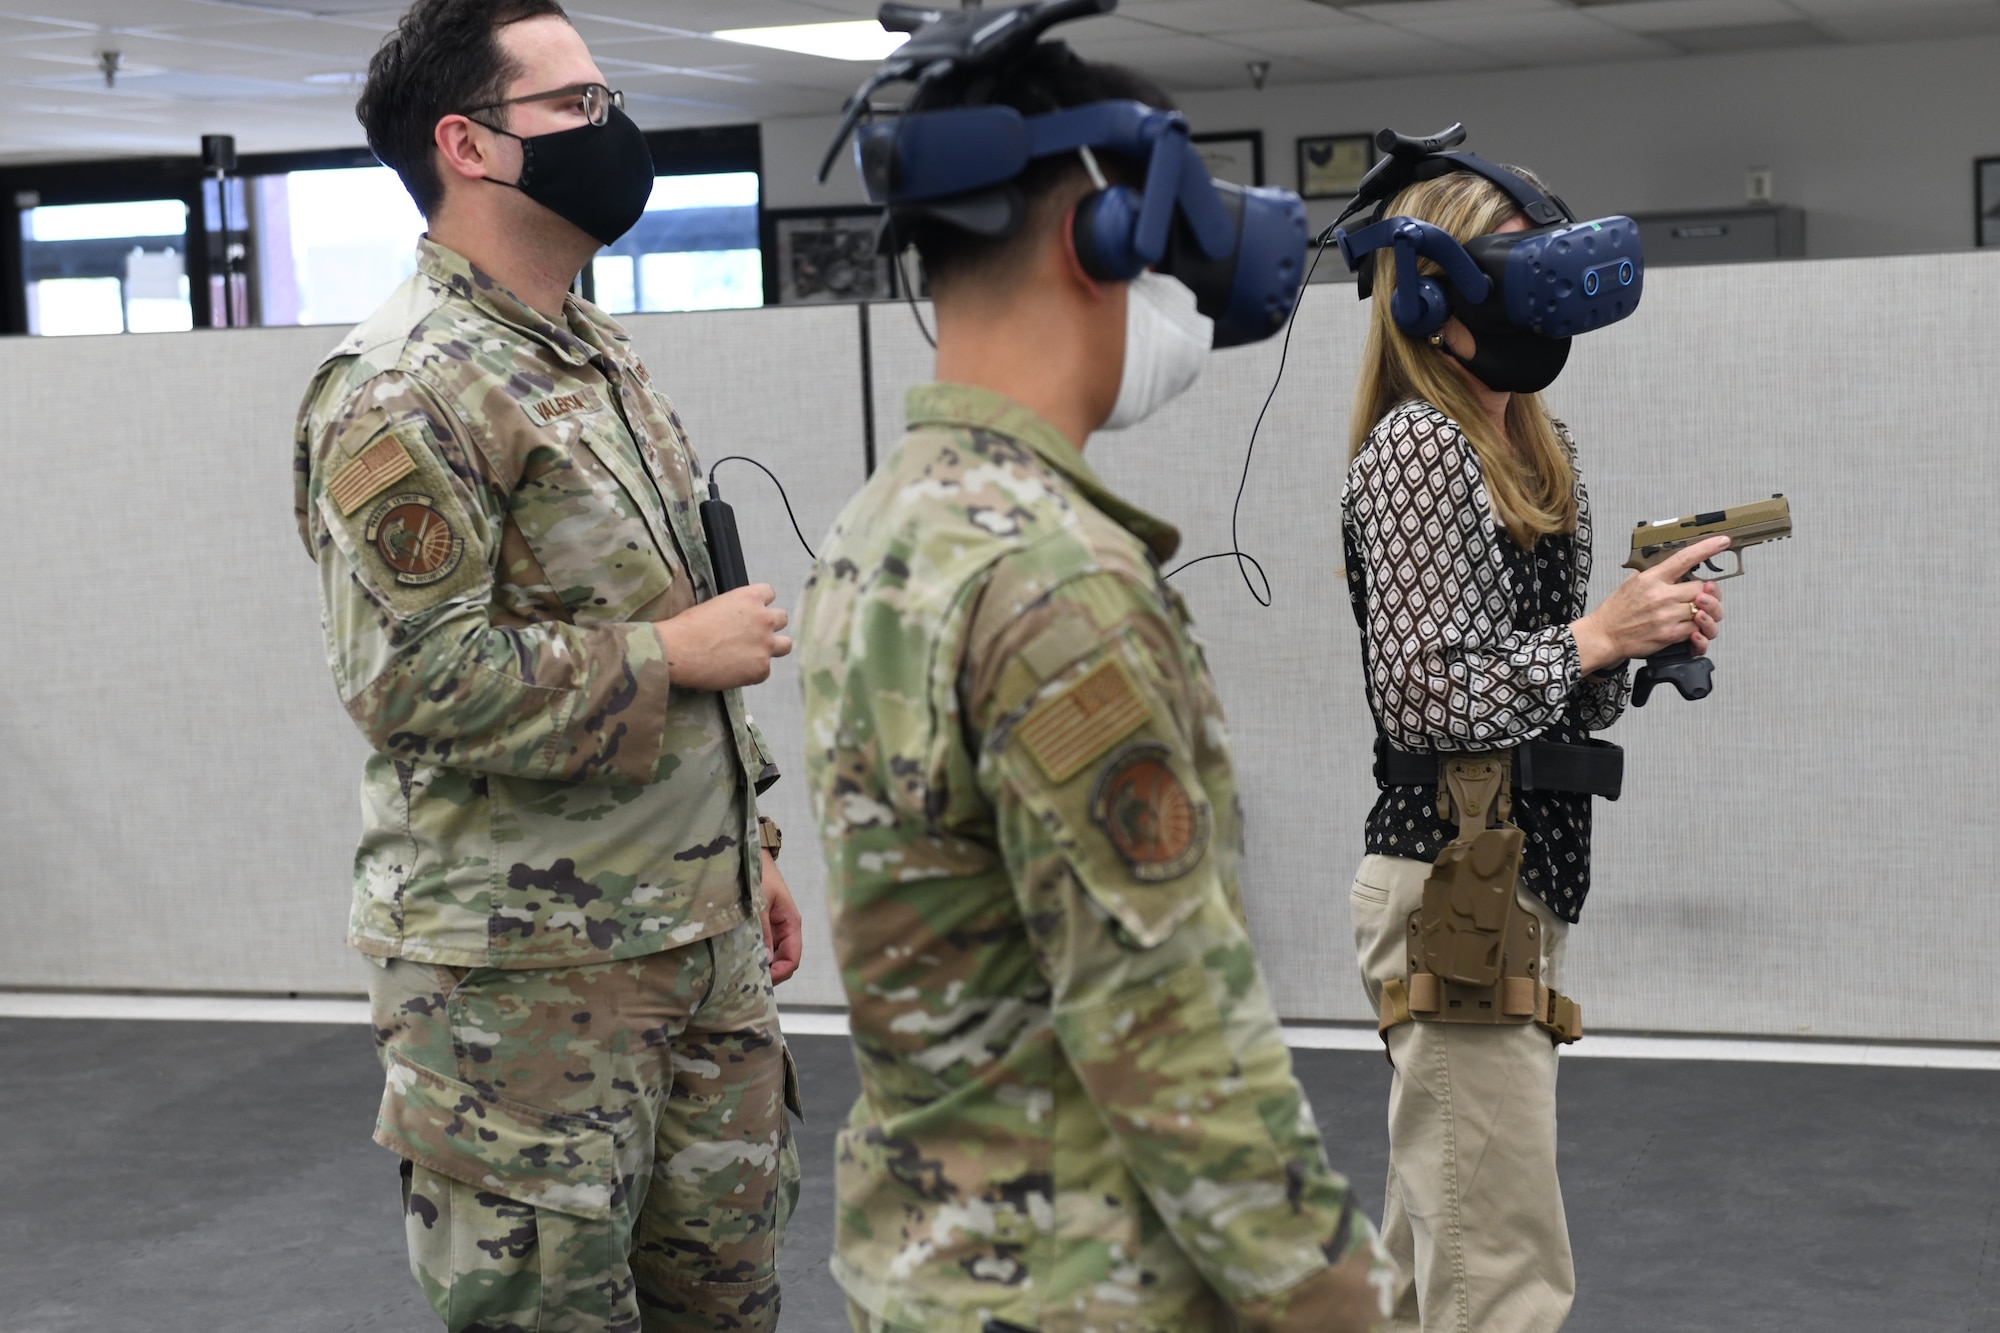 Photo shows two individuals using a VR system with a person behind them instructing.